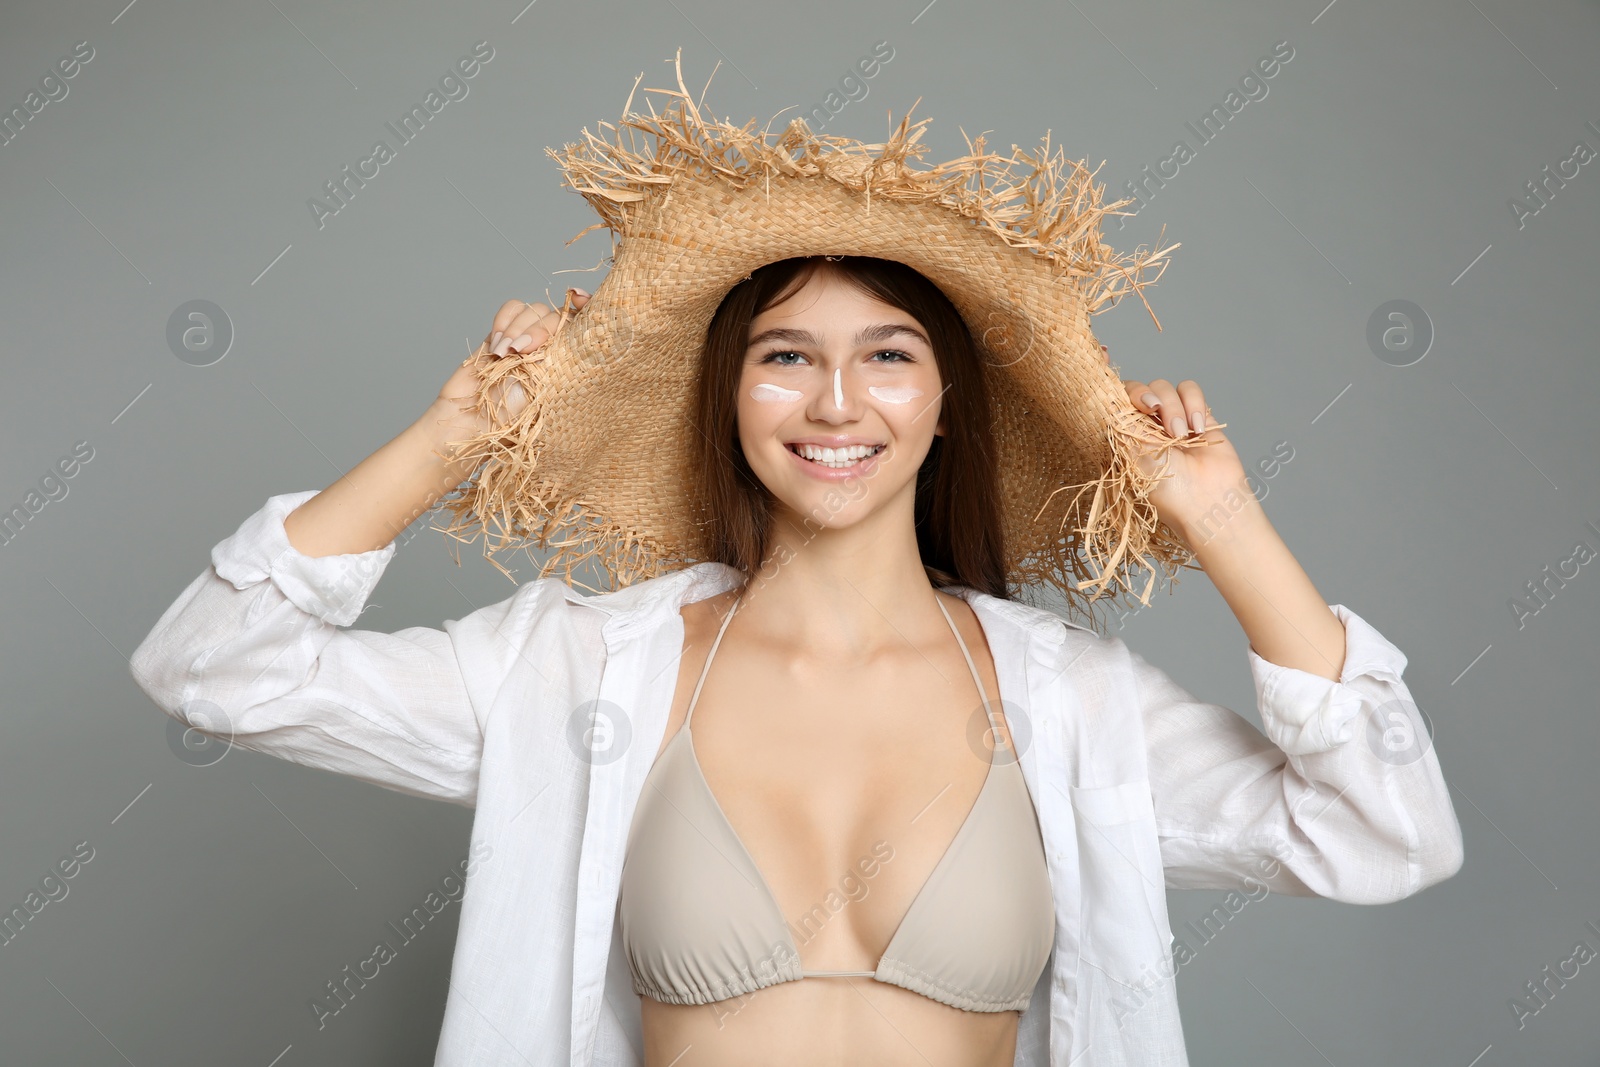 Photo of Teenage girl with sun protection cream on her face against grey background